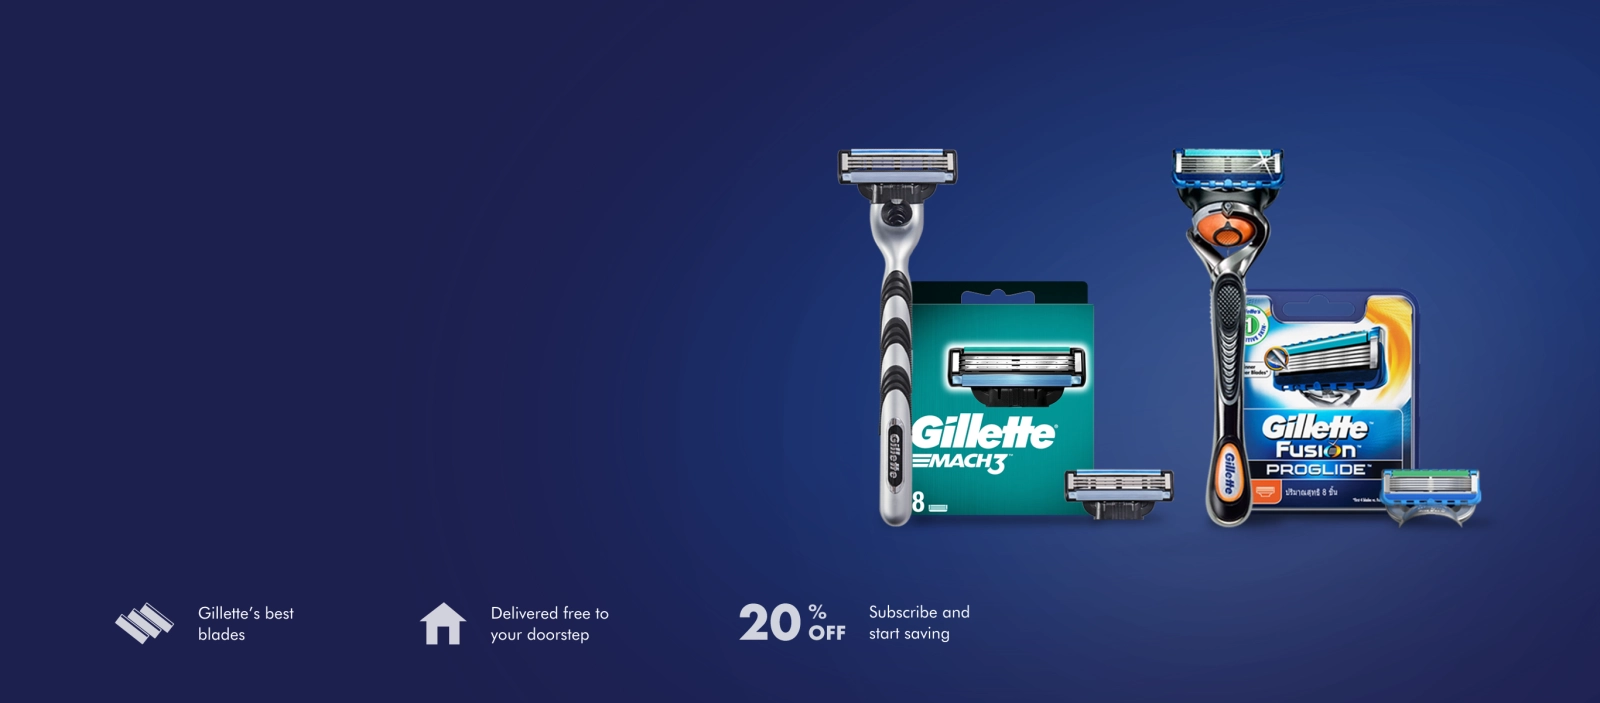 Introducing The Gillette Club